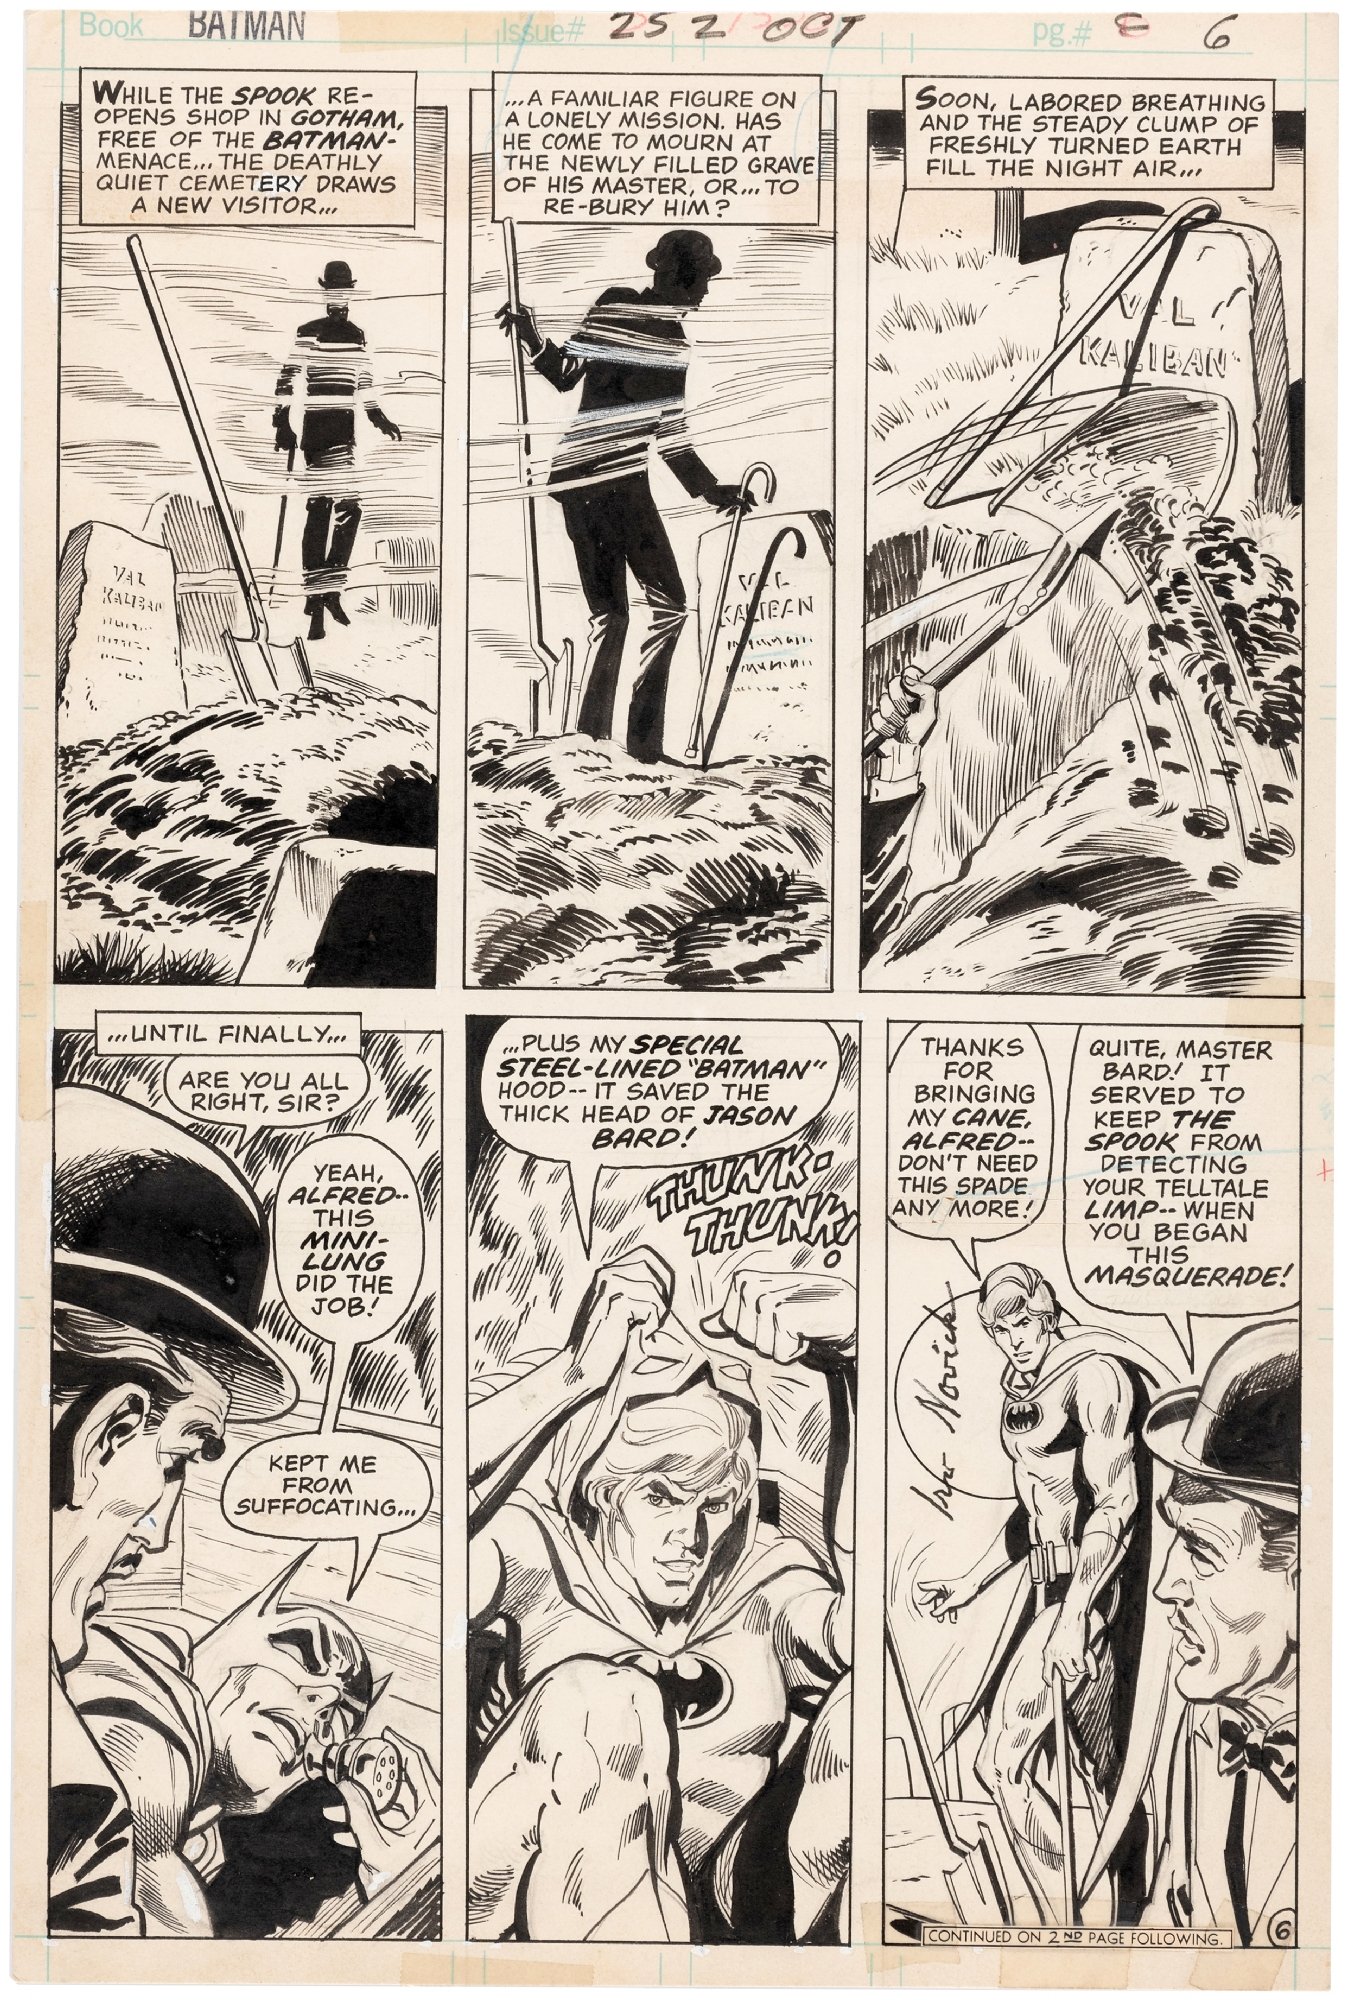 BATMAN VOL. 1 #252 COMIC BOOK PAGE ORIGINAL ART BY IRV NOVICK., in Hake's  Auctions's Auction #230 September 2020! Comic Art Gallery Room